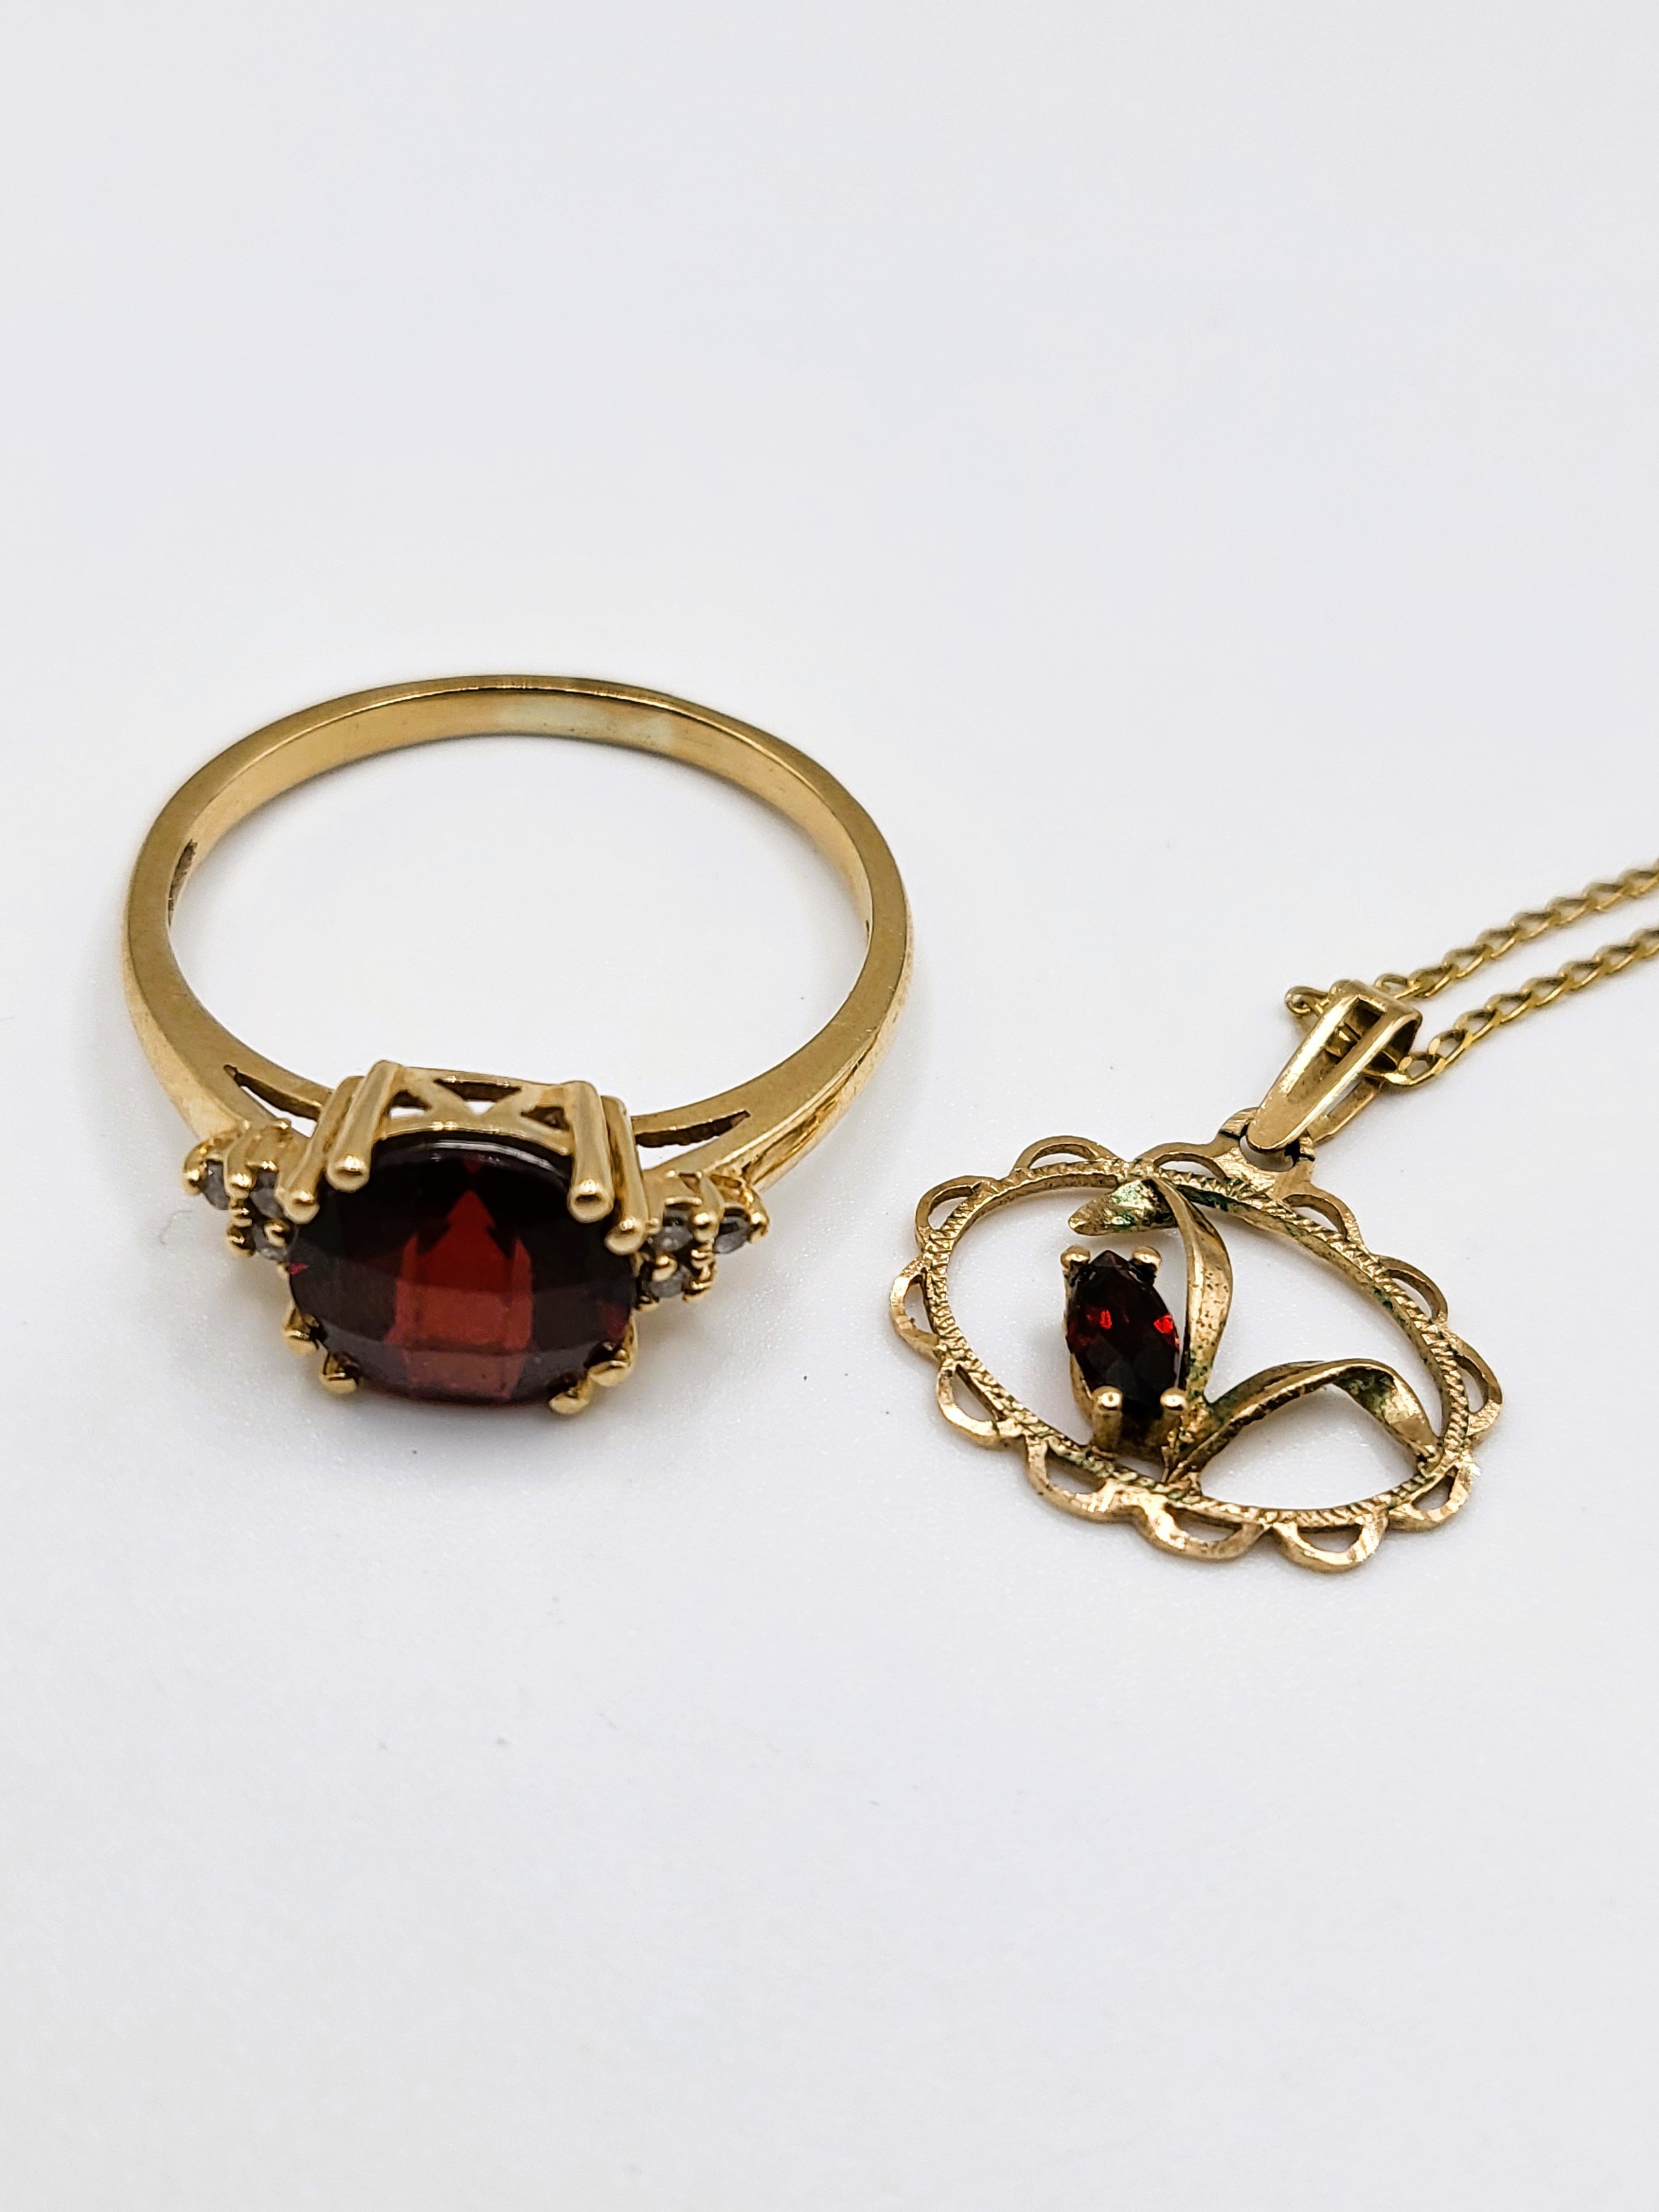 A 9ct yellow gold, diamond, and garnet ring, set with a round chequerboard-cut garnet, size P 1/2,